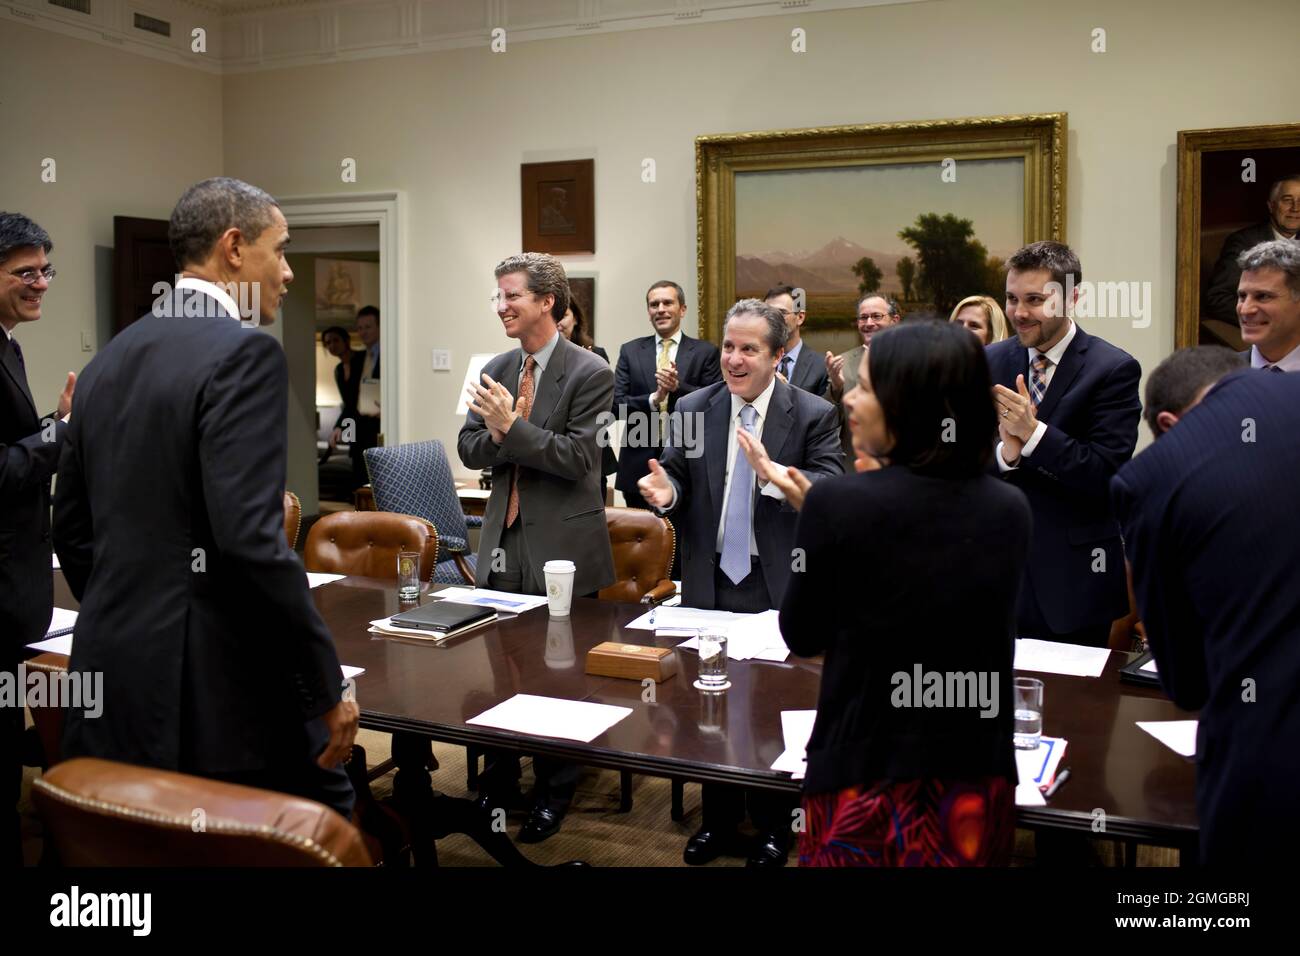 President Barack Obama is congratulated by advisors on the agreement to extend the payroll tax cut, before a meeting in the Roosevelt Room of the White House, Dec. 22, 2011. Standing at the table, from left, are: Jack Lew, Director of the Office of Management and Budget; Housing and Urban Development Secretary Shaun Donovan; Gene Sperling, National Economic Council Director; Nancy-Ann DeParle, Deputy Chief of Staff for Policy; Brian Deese, Deputy Director of the National Economic Council; Neal Wolin, Deputy Secretary of the Treasury ; and Alan Krueger, Chair of the Council of Economic Advisers Stock Photo